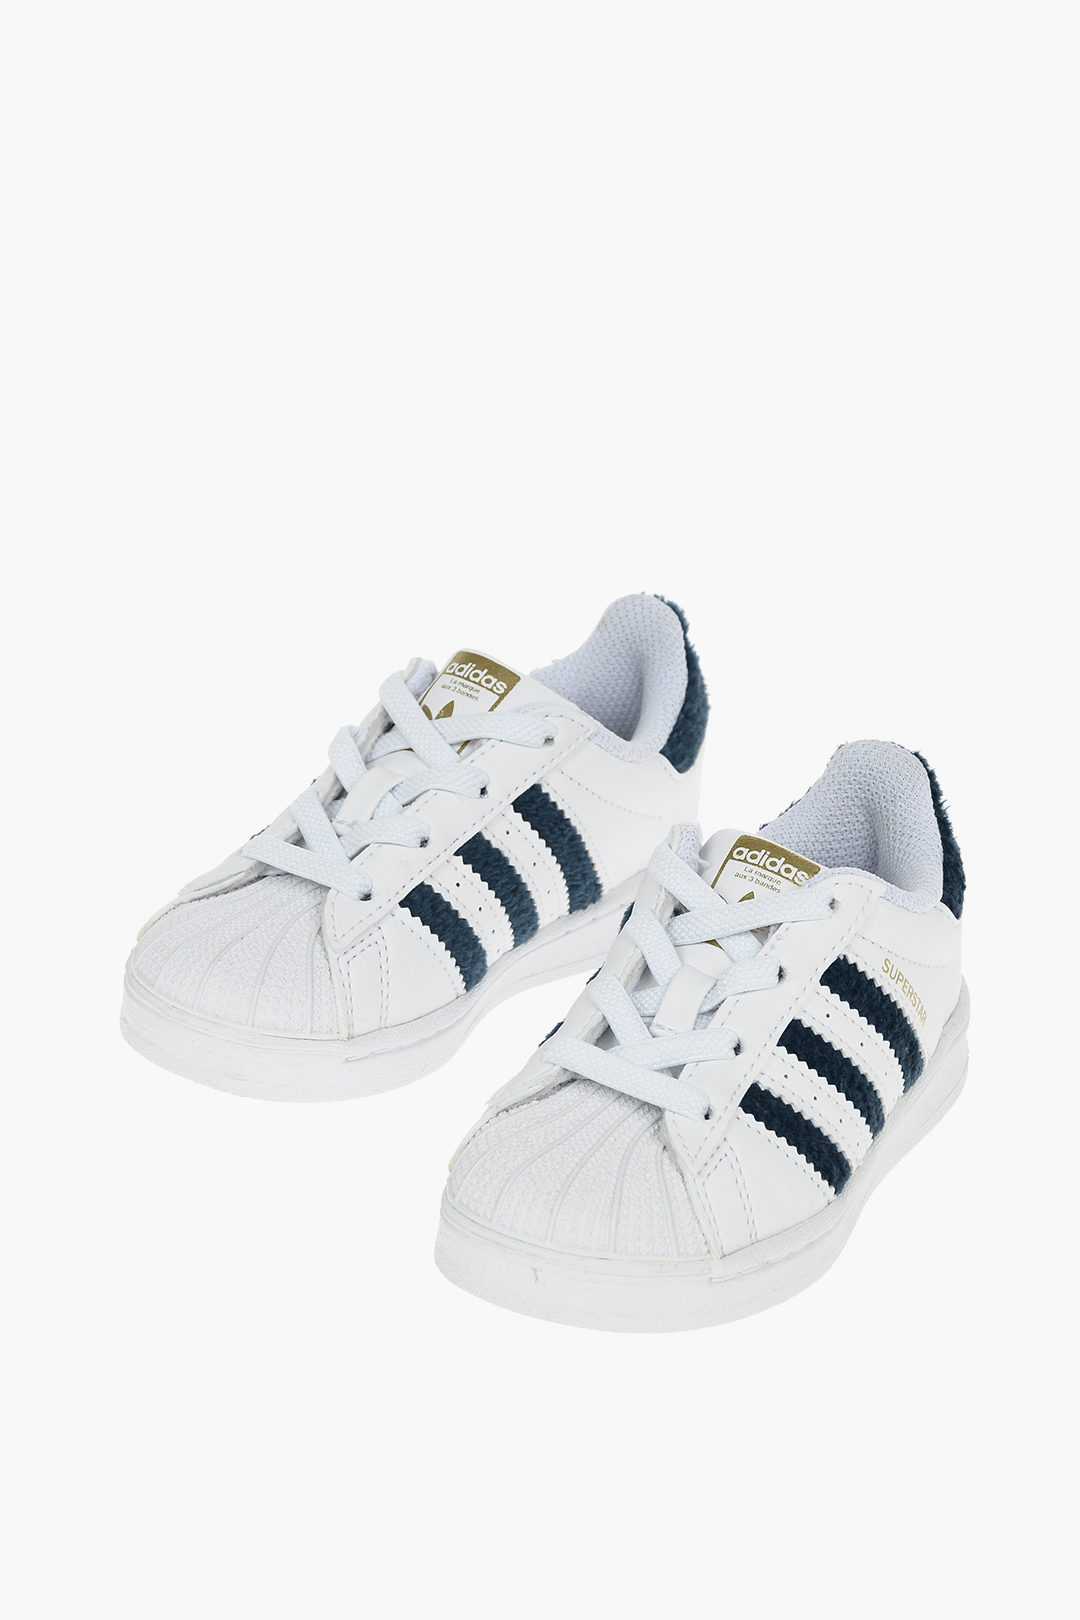 Adidas Kids leather SUPERSTAR I sneakers with fabric trimmings unisex children boys girls - Glamood Outlet